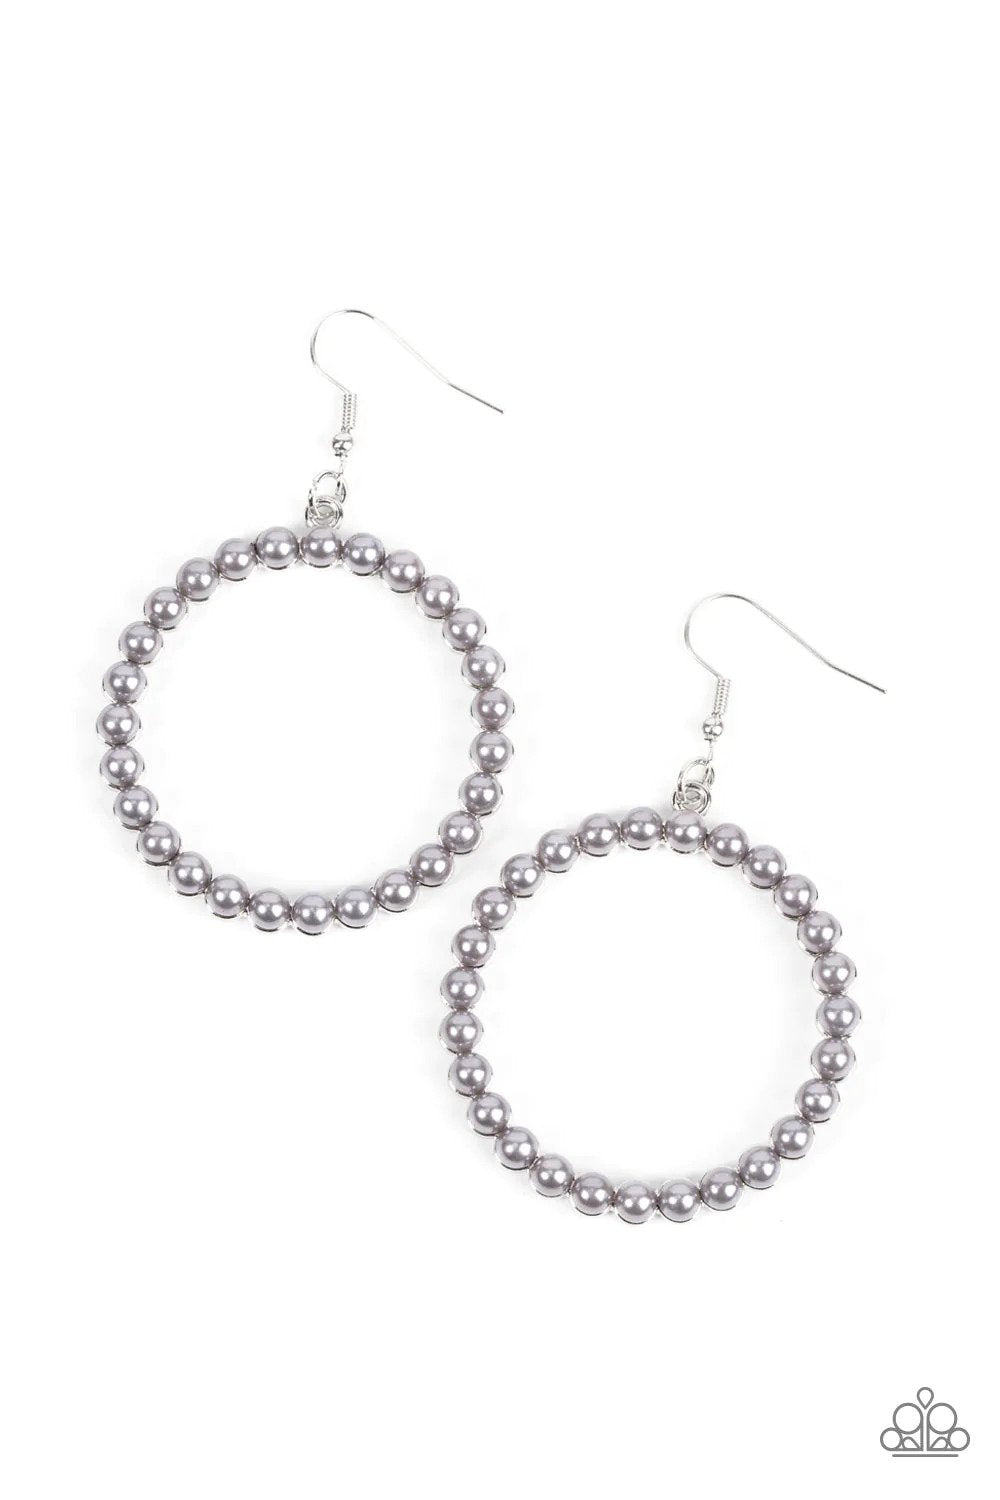 Can I Get A Hallelujah Silver Earrings - Paparazzi Accessories- lightbox - CarasShop.com - $5 Jewelry by Cara Jewels